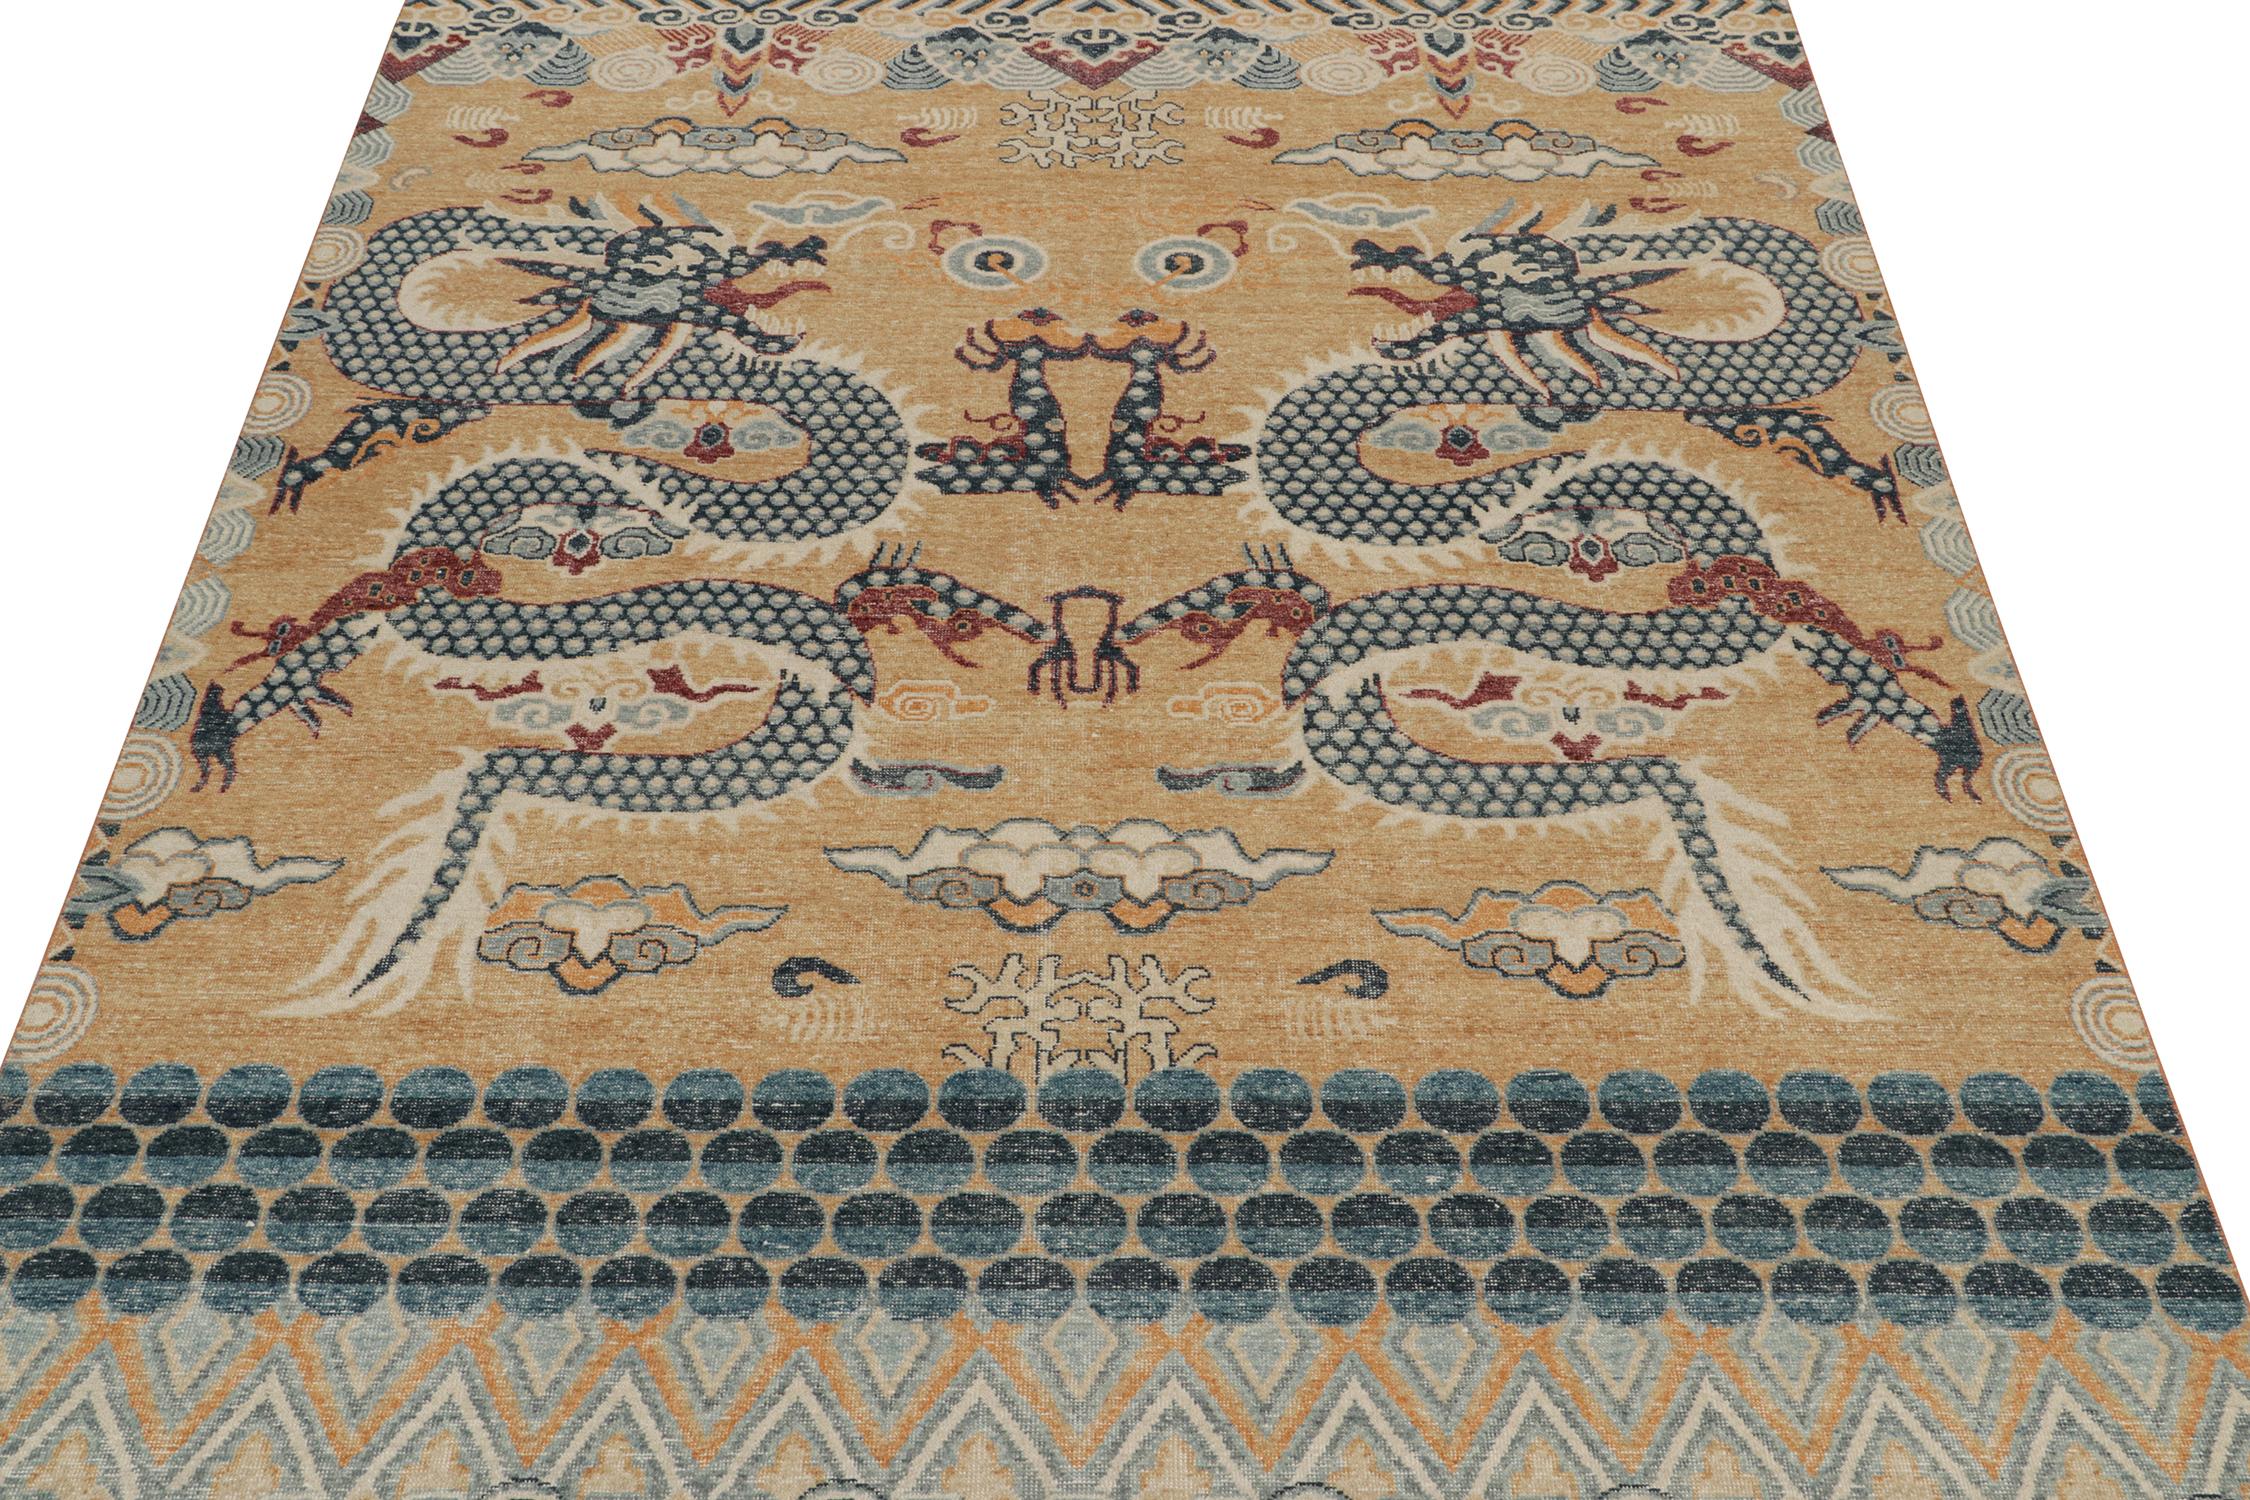 Indian Rug & Kilim’s Distressed Style Rug in Gold, Blue, Red Dragon Pictorial For Sale